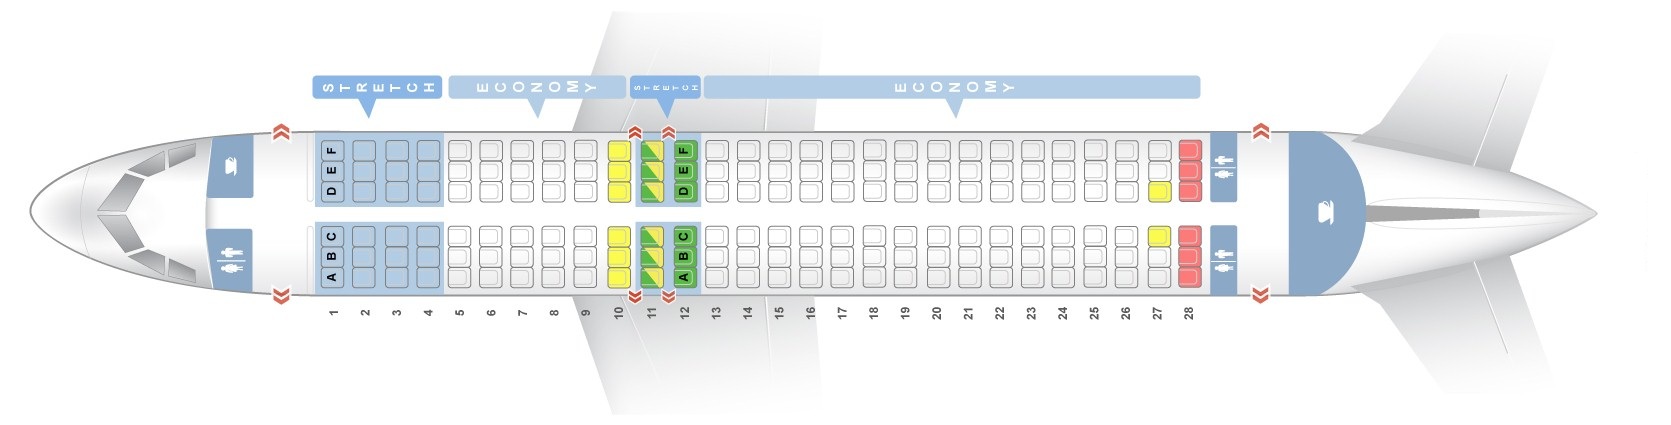 Frontier Airlines Seating Chart Airbus A320